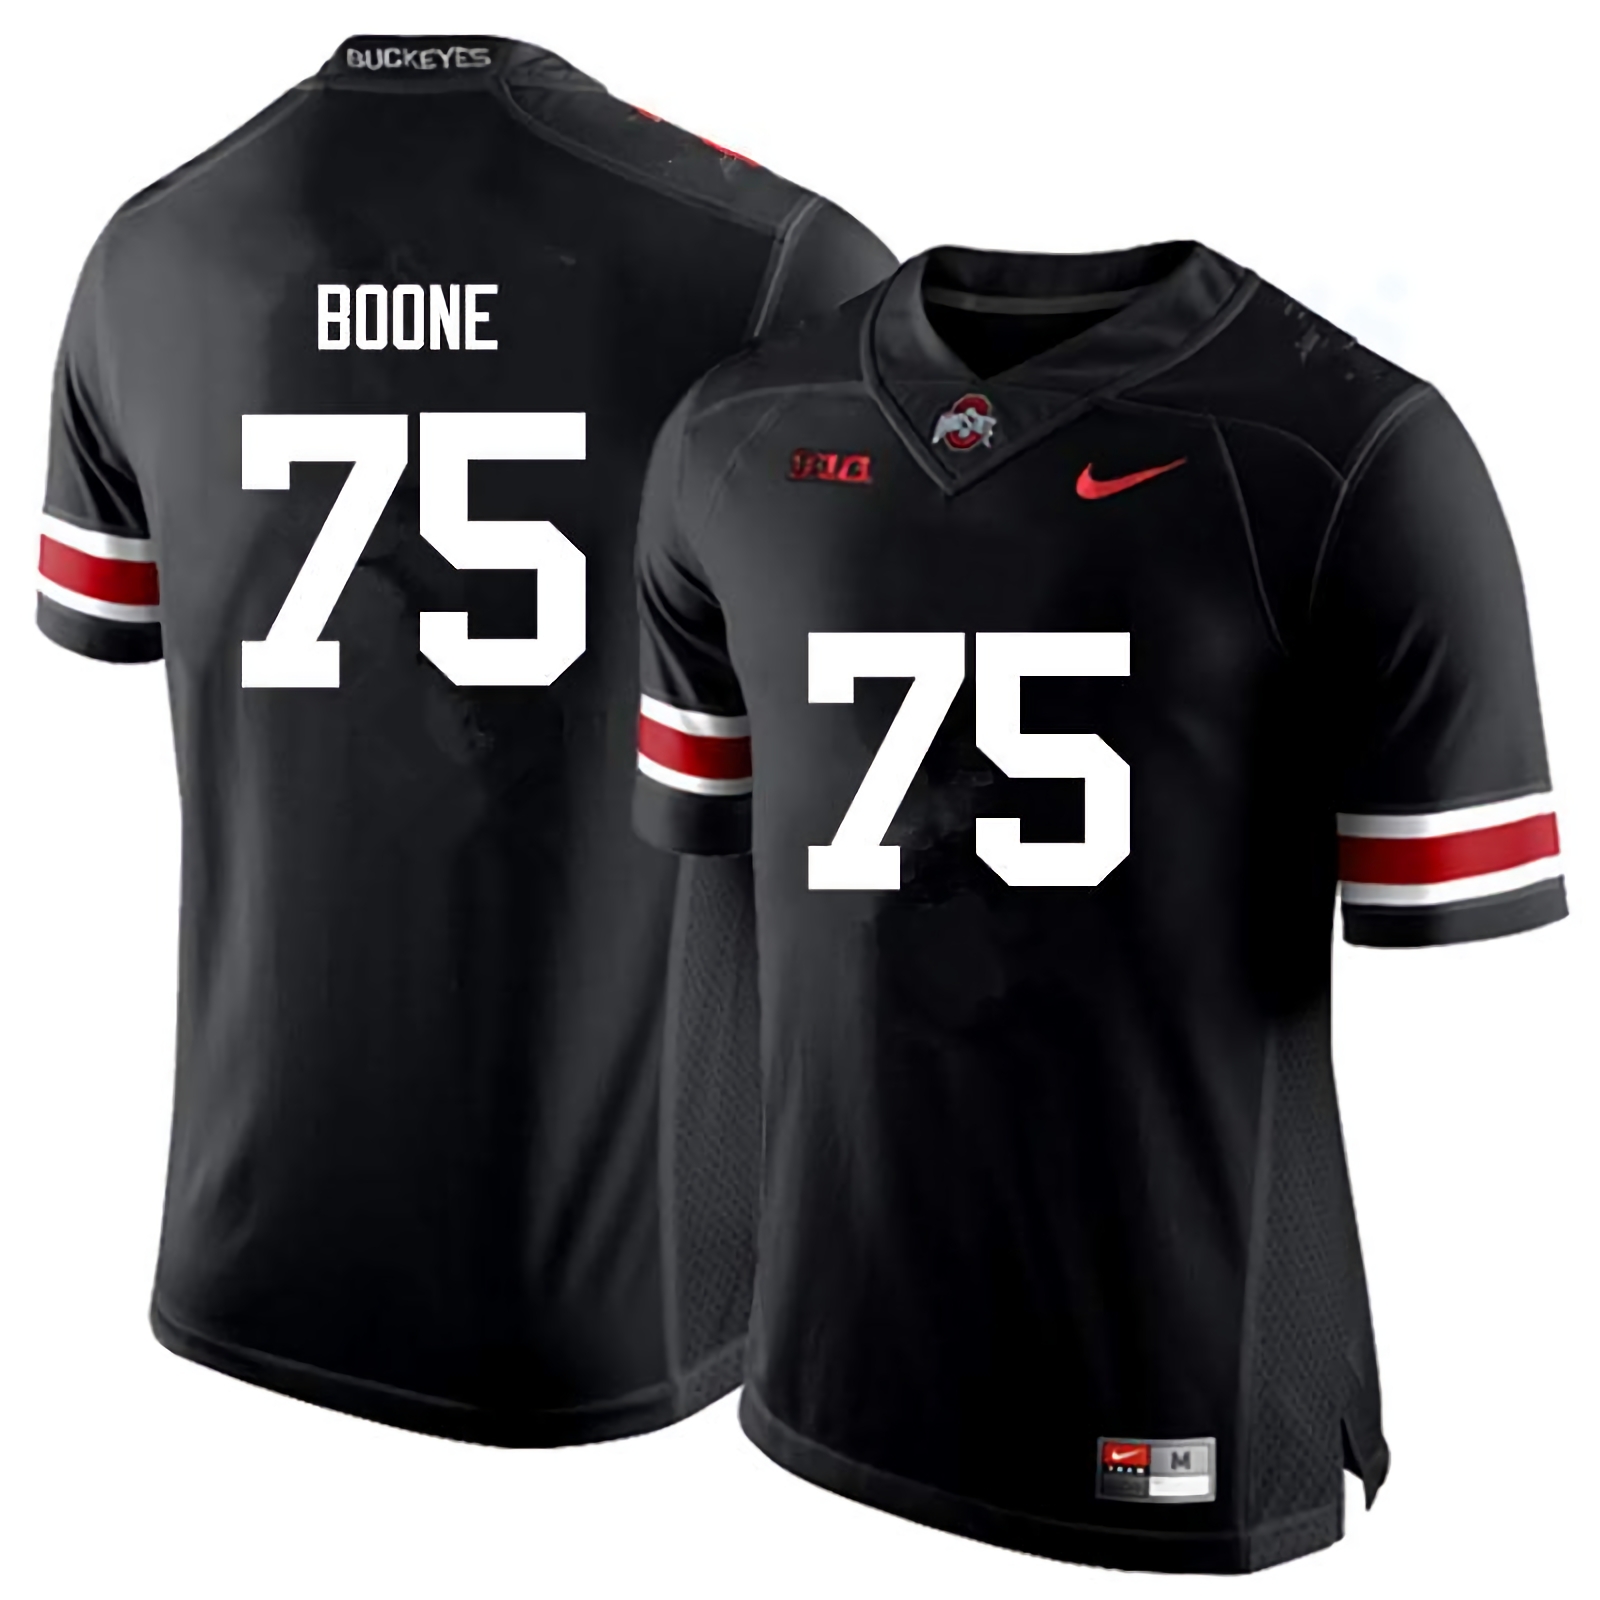 Alex Boone Ohio State Buckeyes Men's NCAA #75 Nike Black College Stitched Football Jersey UAV8356GY